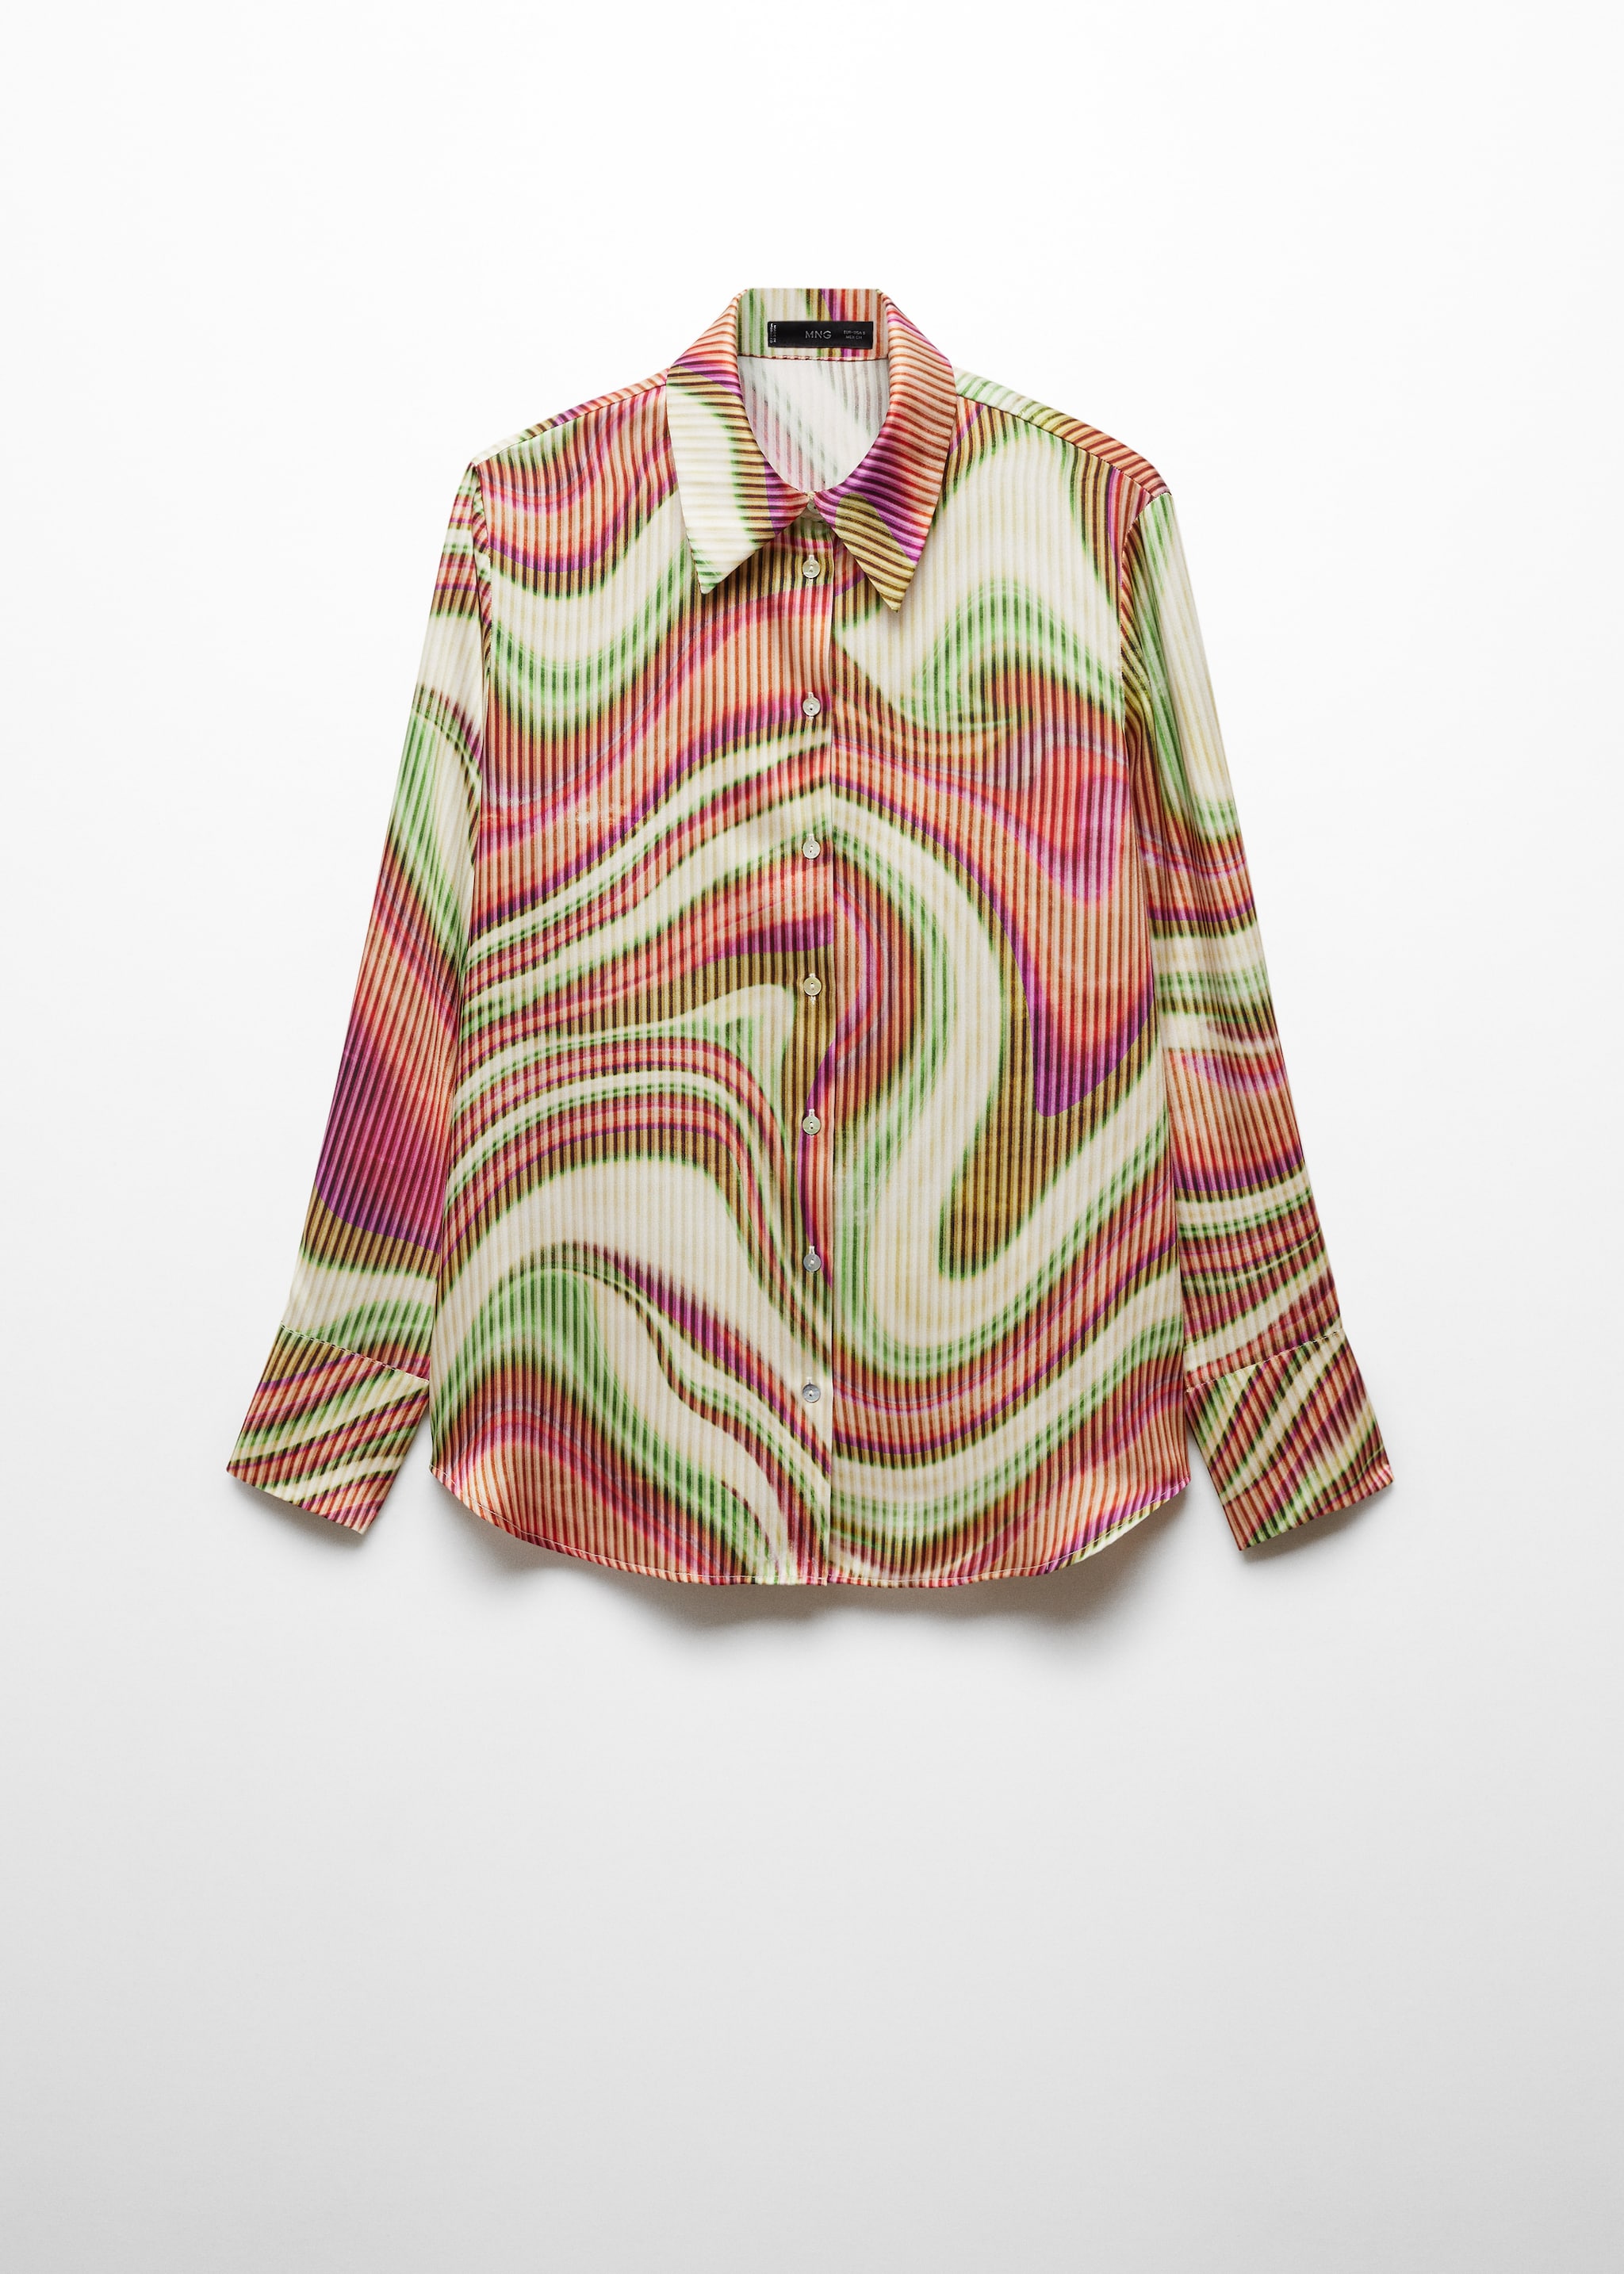 Satin print shirt - Article without model